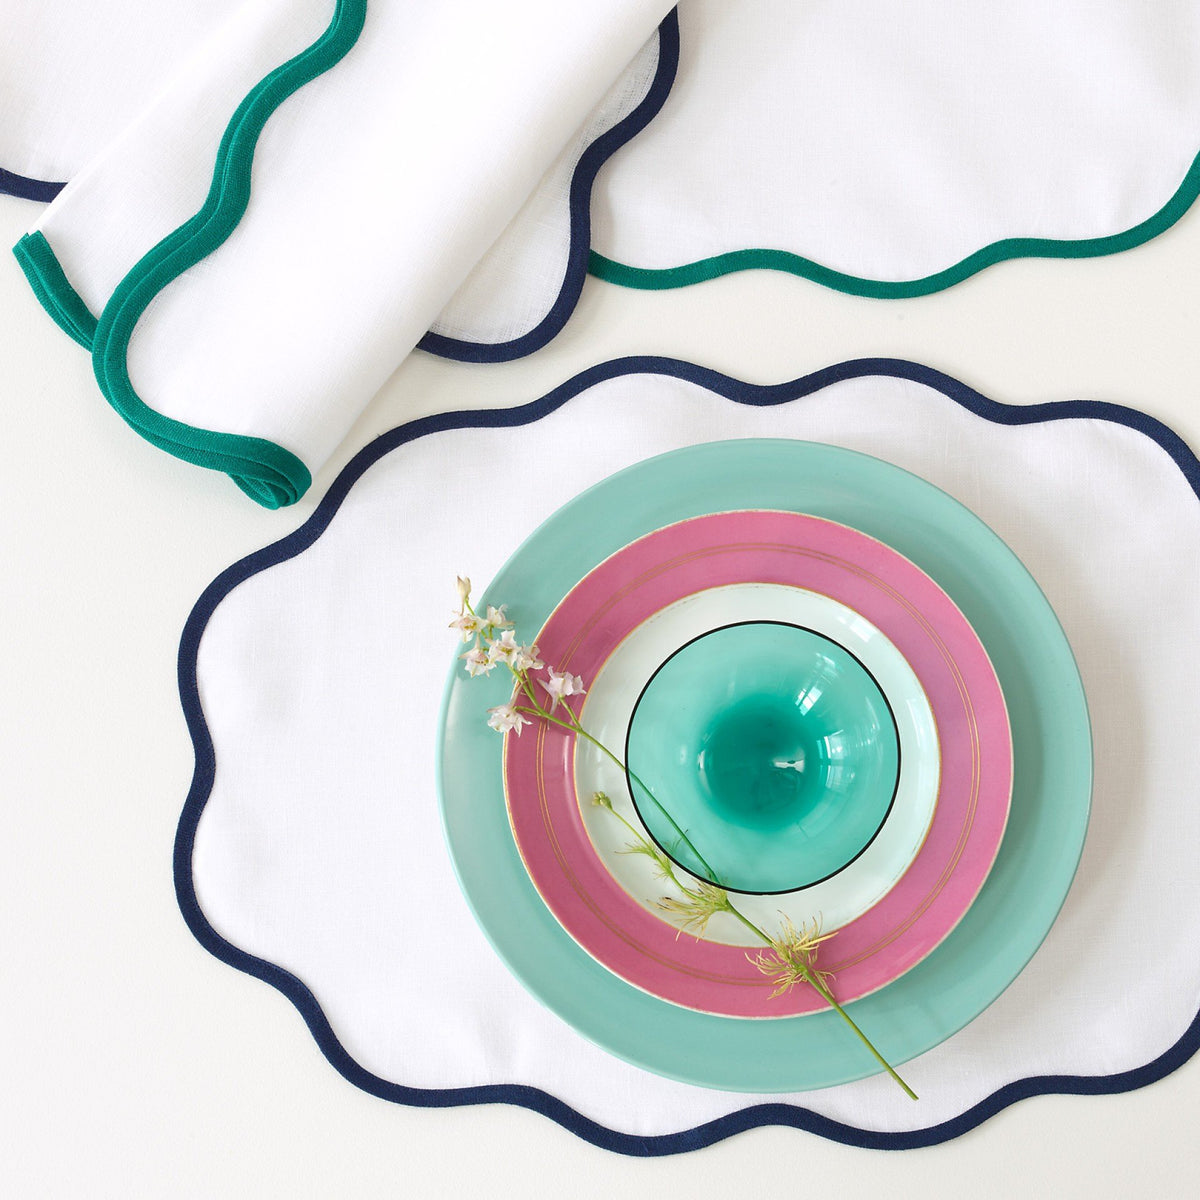 Matouk Scallop Placemats and Napkins | Fig Linens and Home